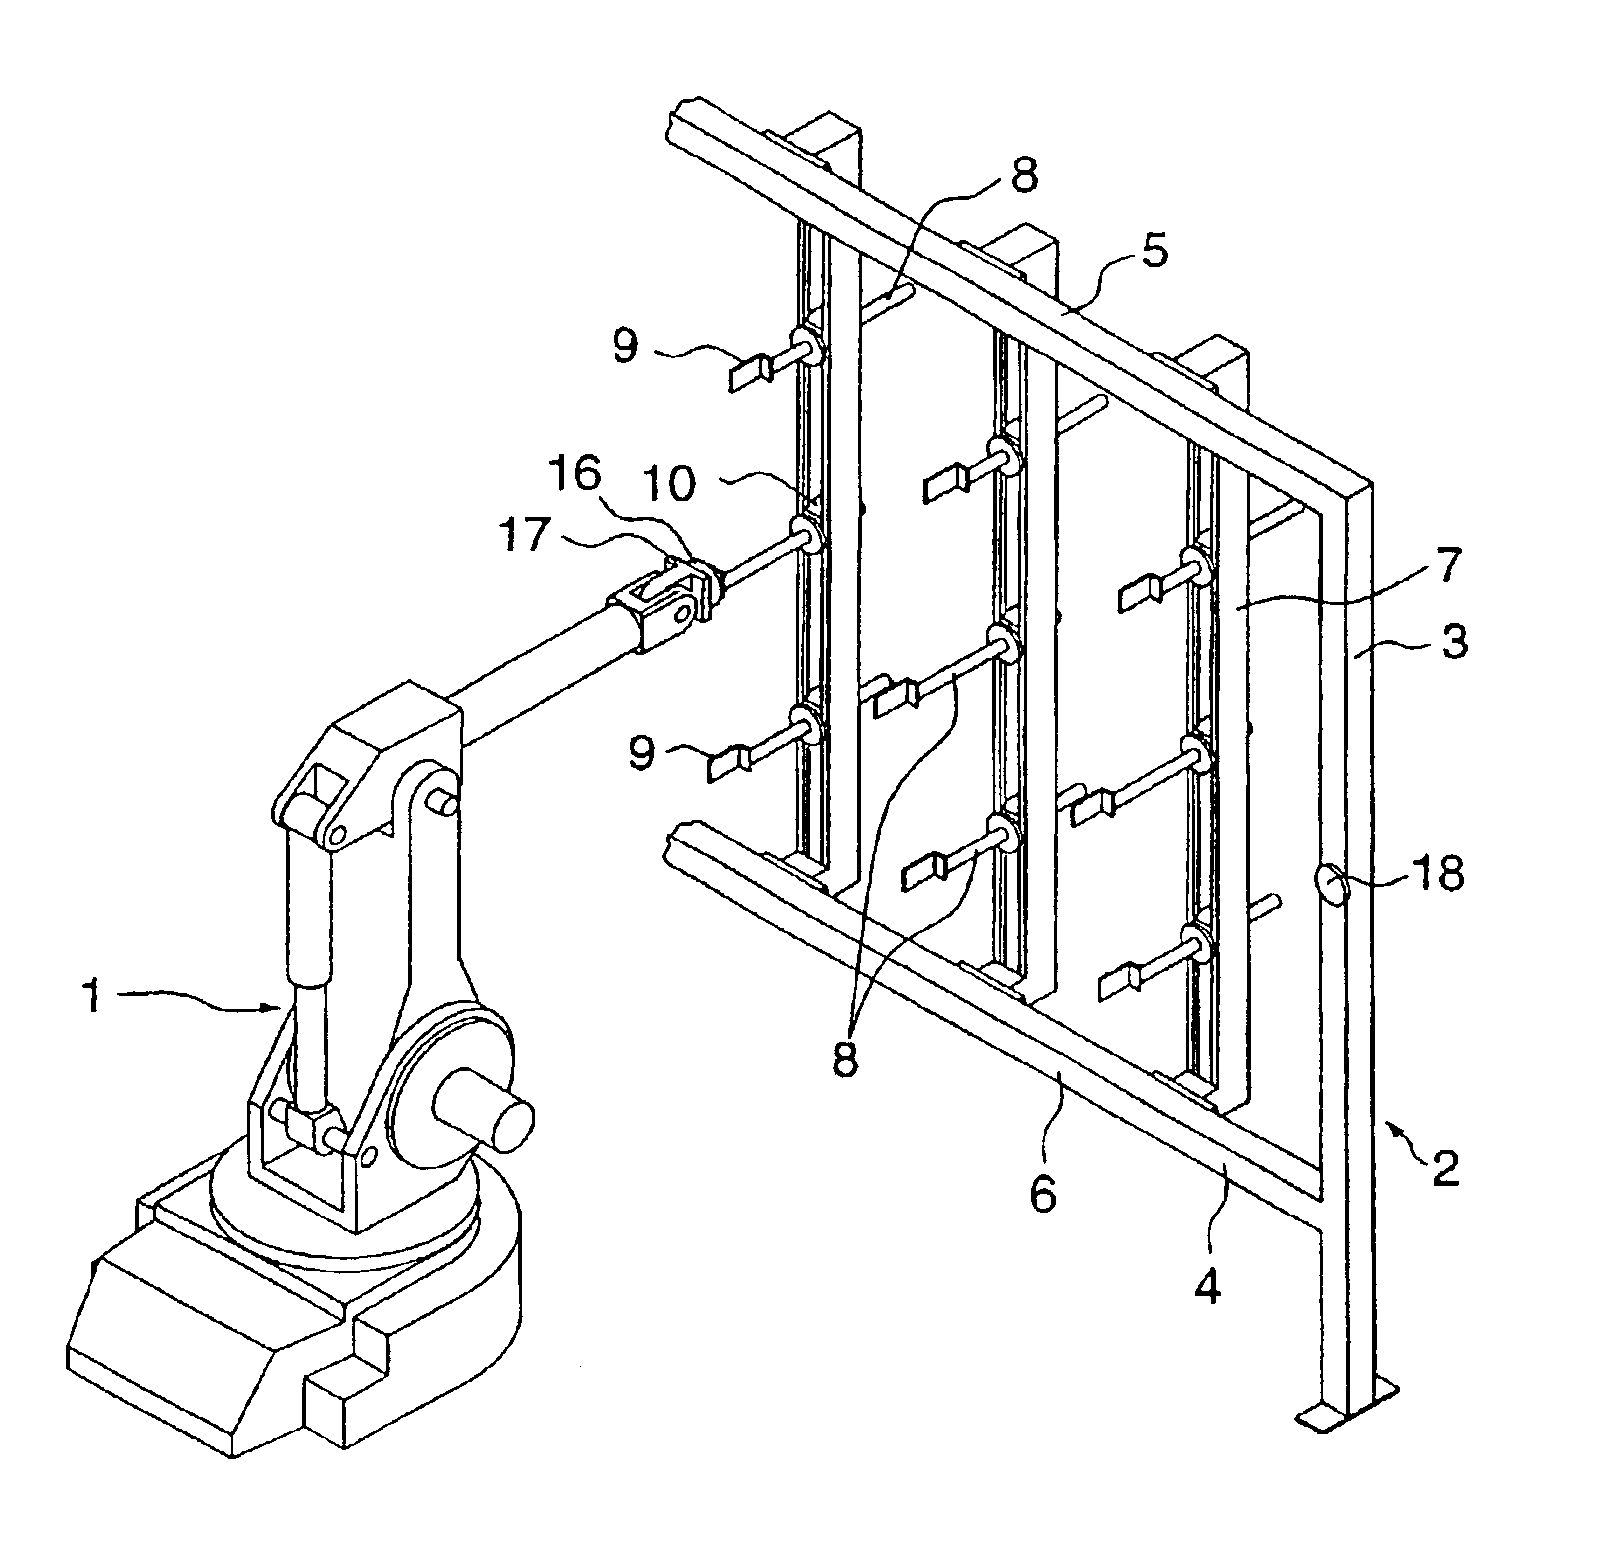 Device and method for fixation of airframe pieces